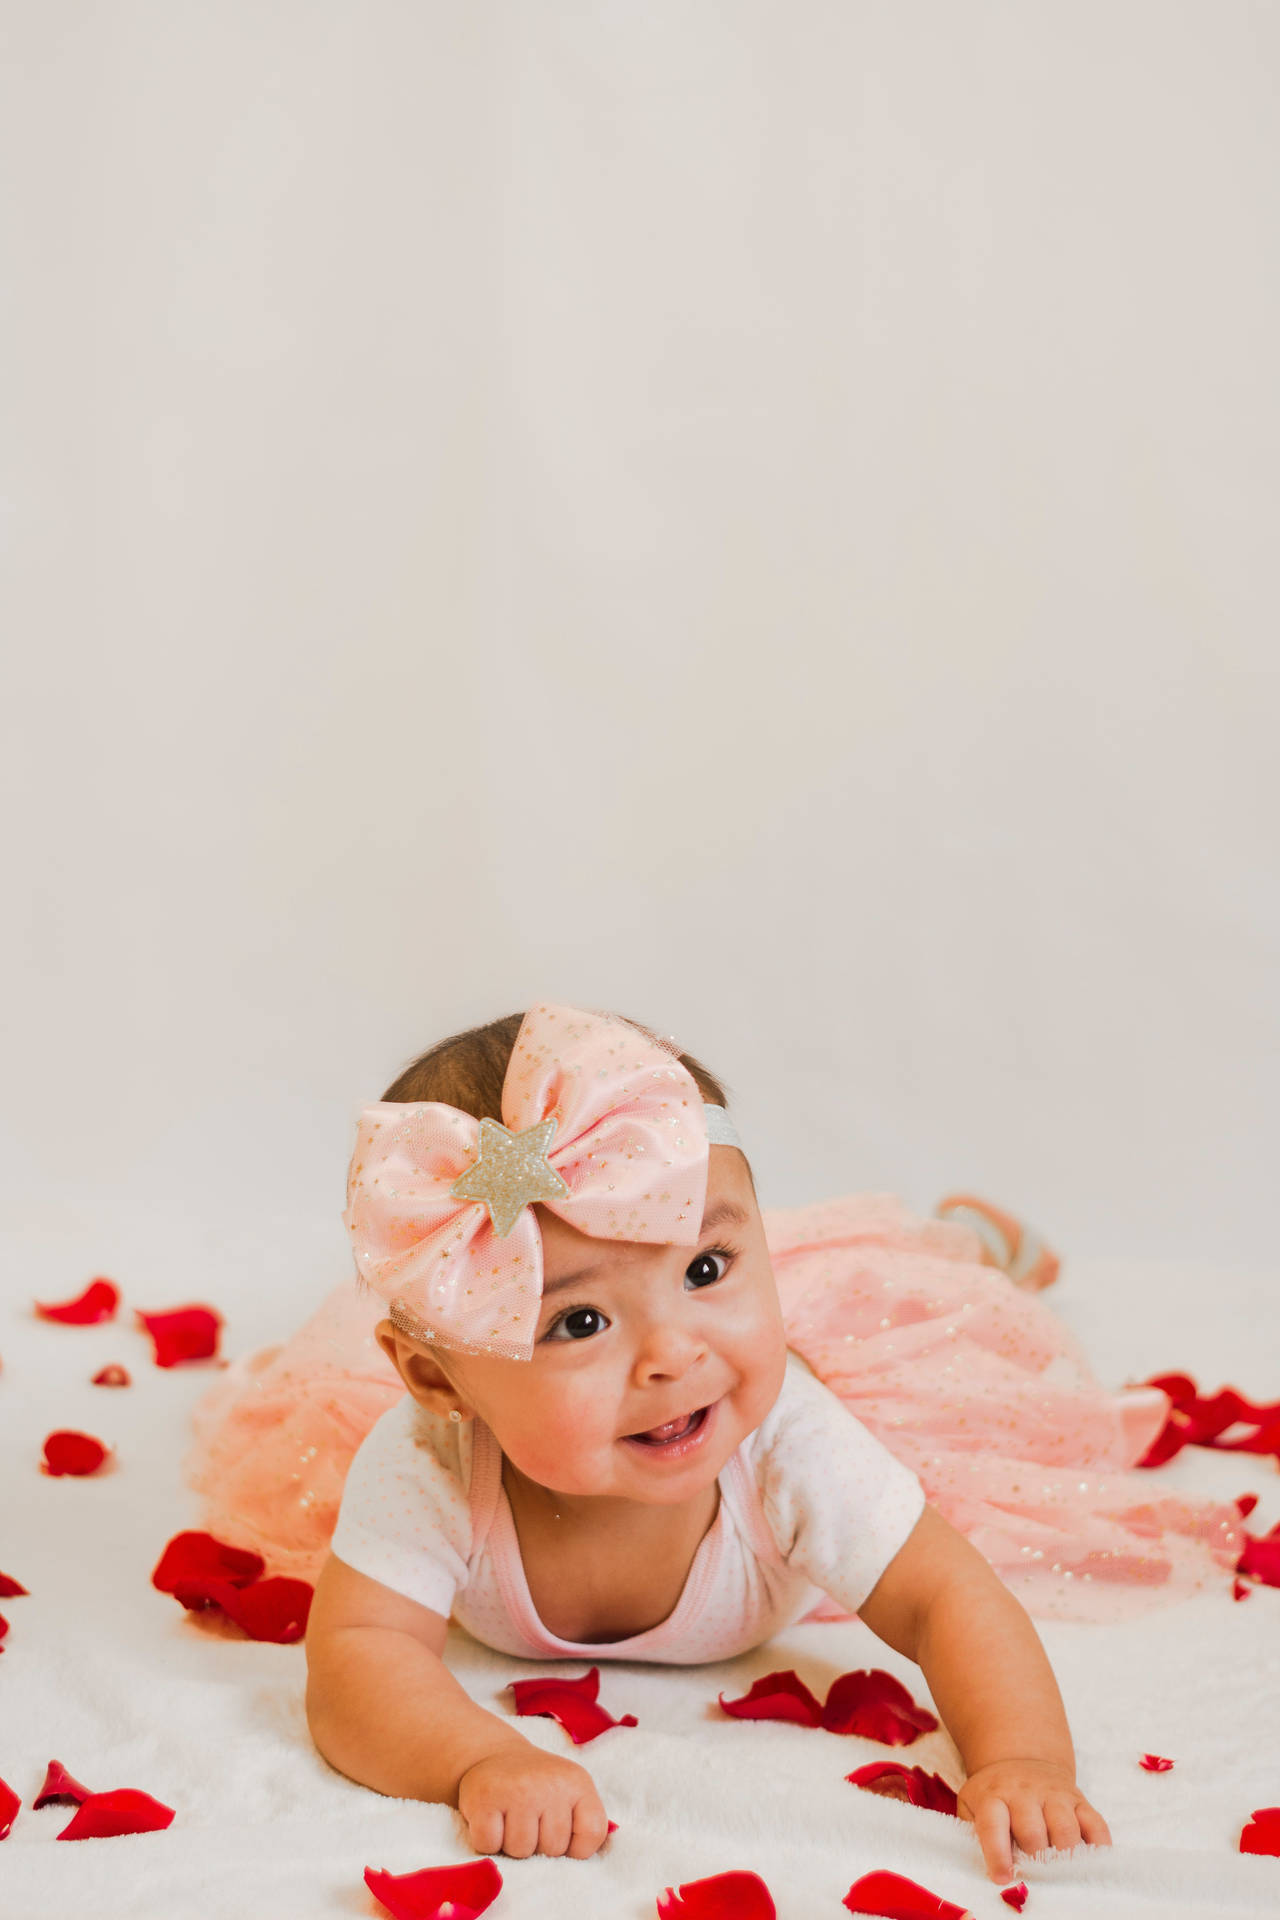 Cute Baby In Pink Dress And Bow Wallpaper